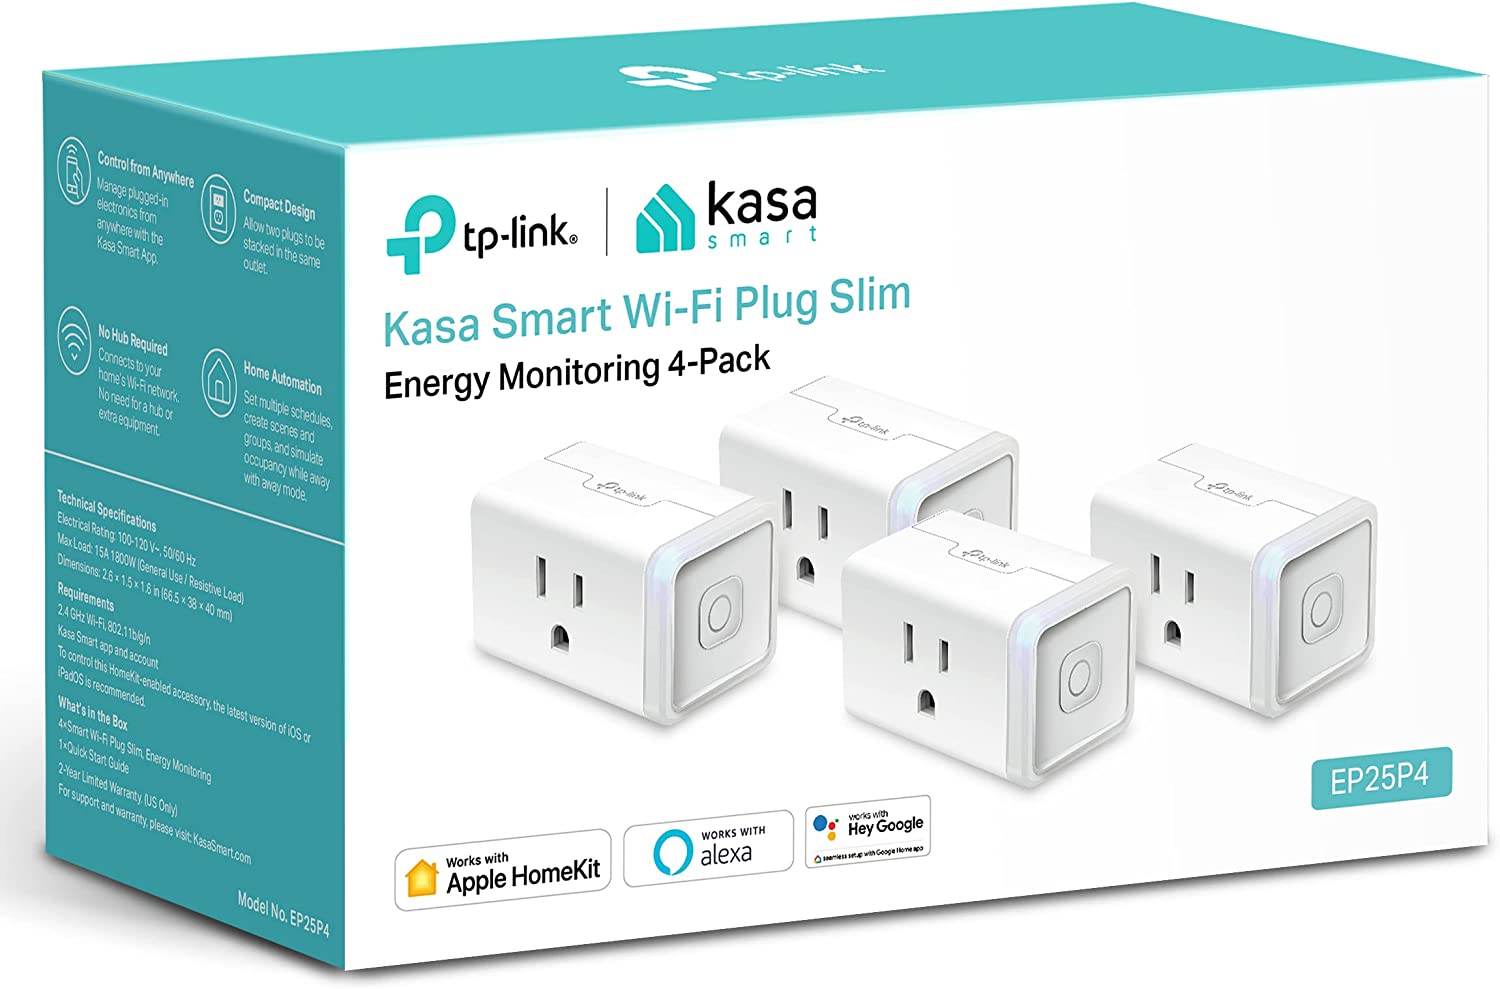 Kasa Smart Plug Mini 15A, Apple HomeKit Supported, Smart Outlet Works with Siri, Alexa & Google Home, No Hub Required, UL Certified, App Control, Scheduling, Timer, 2.4G WiFi Only, 4-Pack (EP25P4)